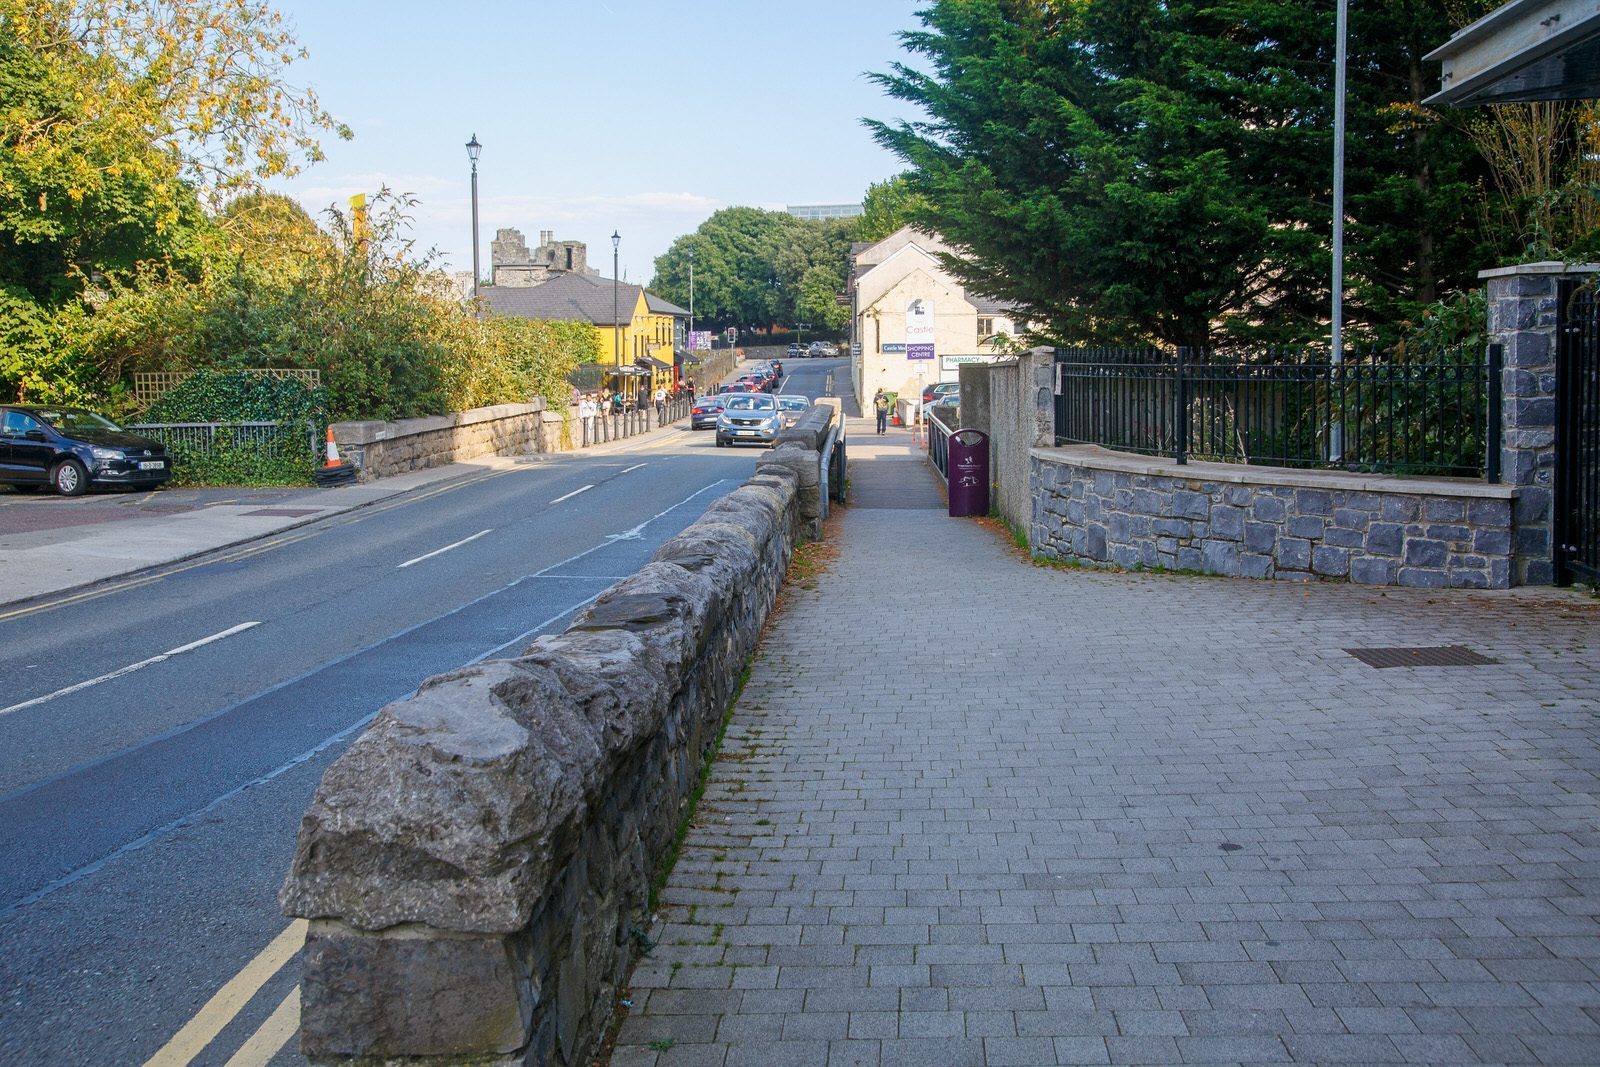 BRIDGE STREET IN SWORDS [AND A SMALL GREEN SPACE] 007